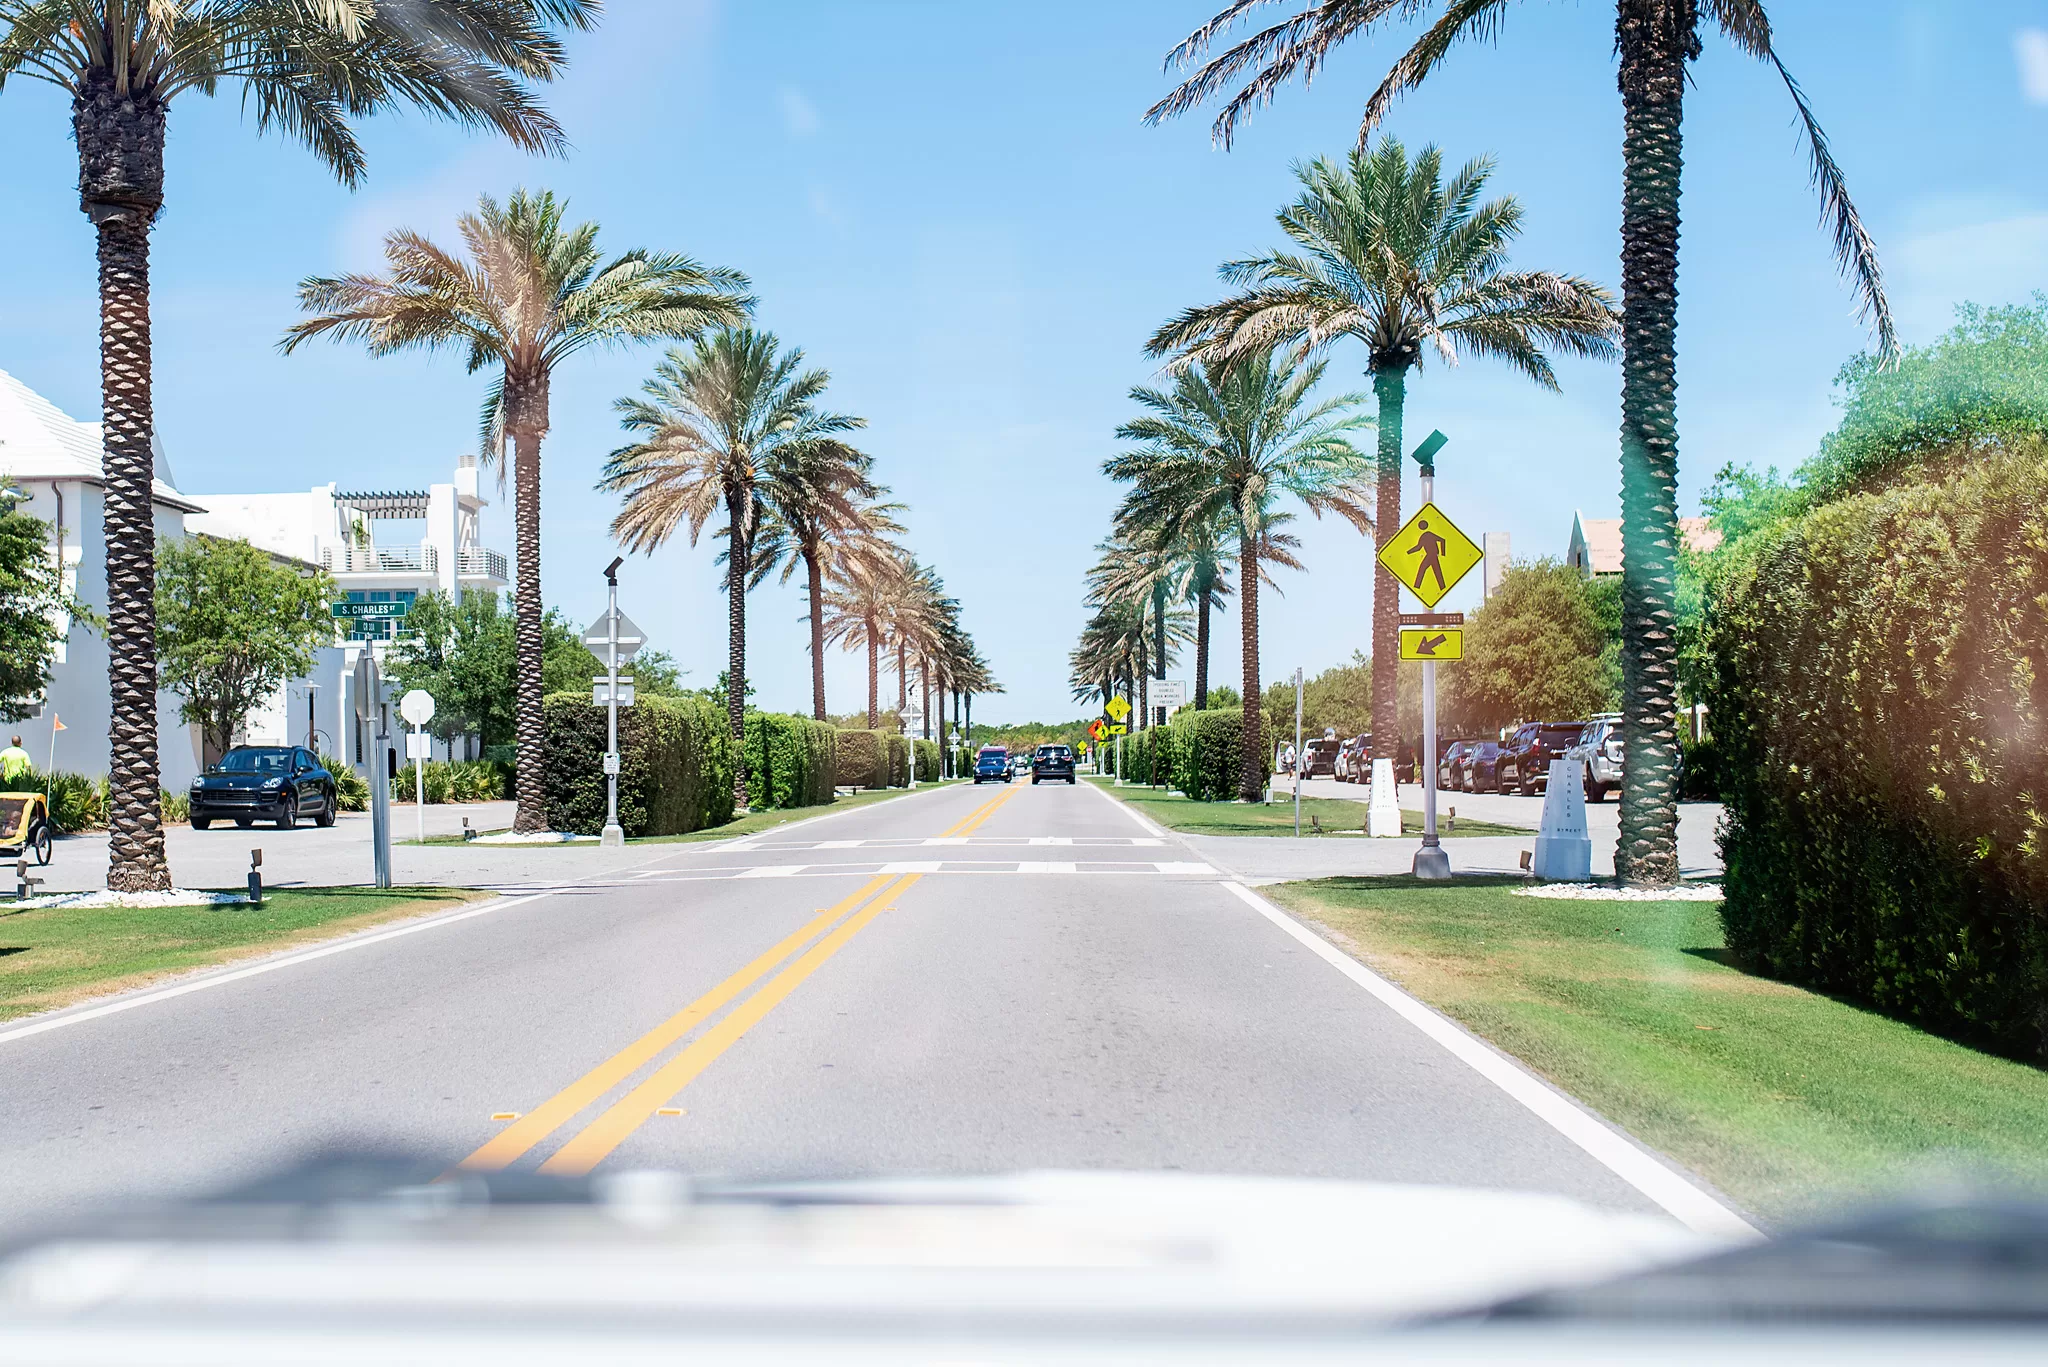 Are 30A Golf Cart Rentals Allowed in Rosemary Beach and Seacrest Beach?